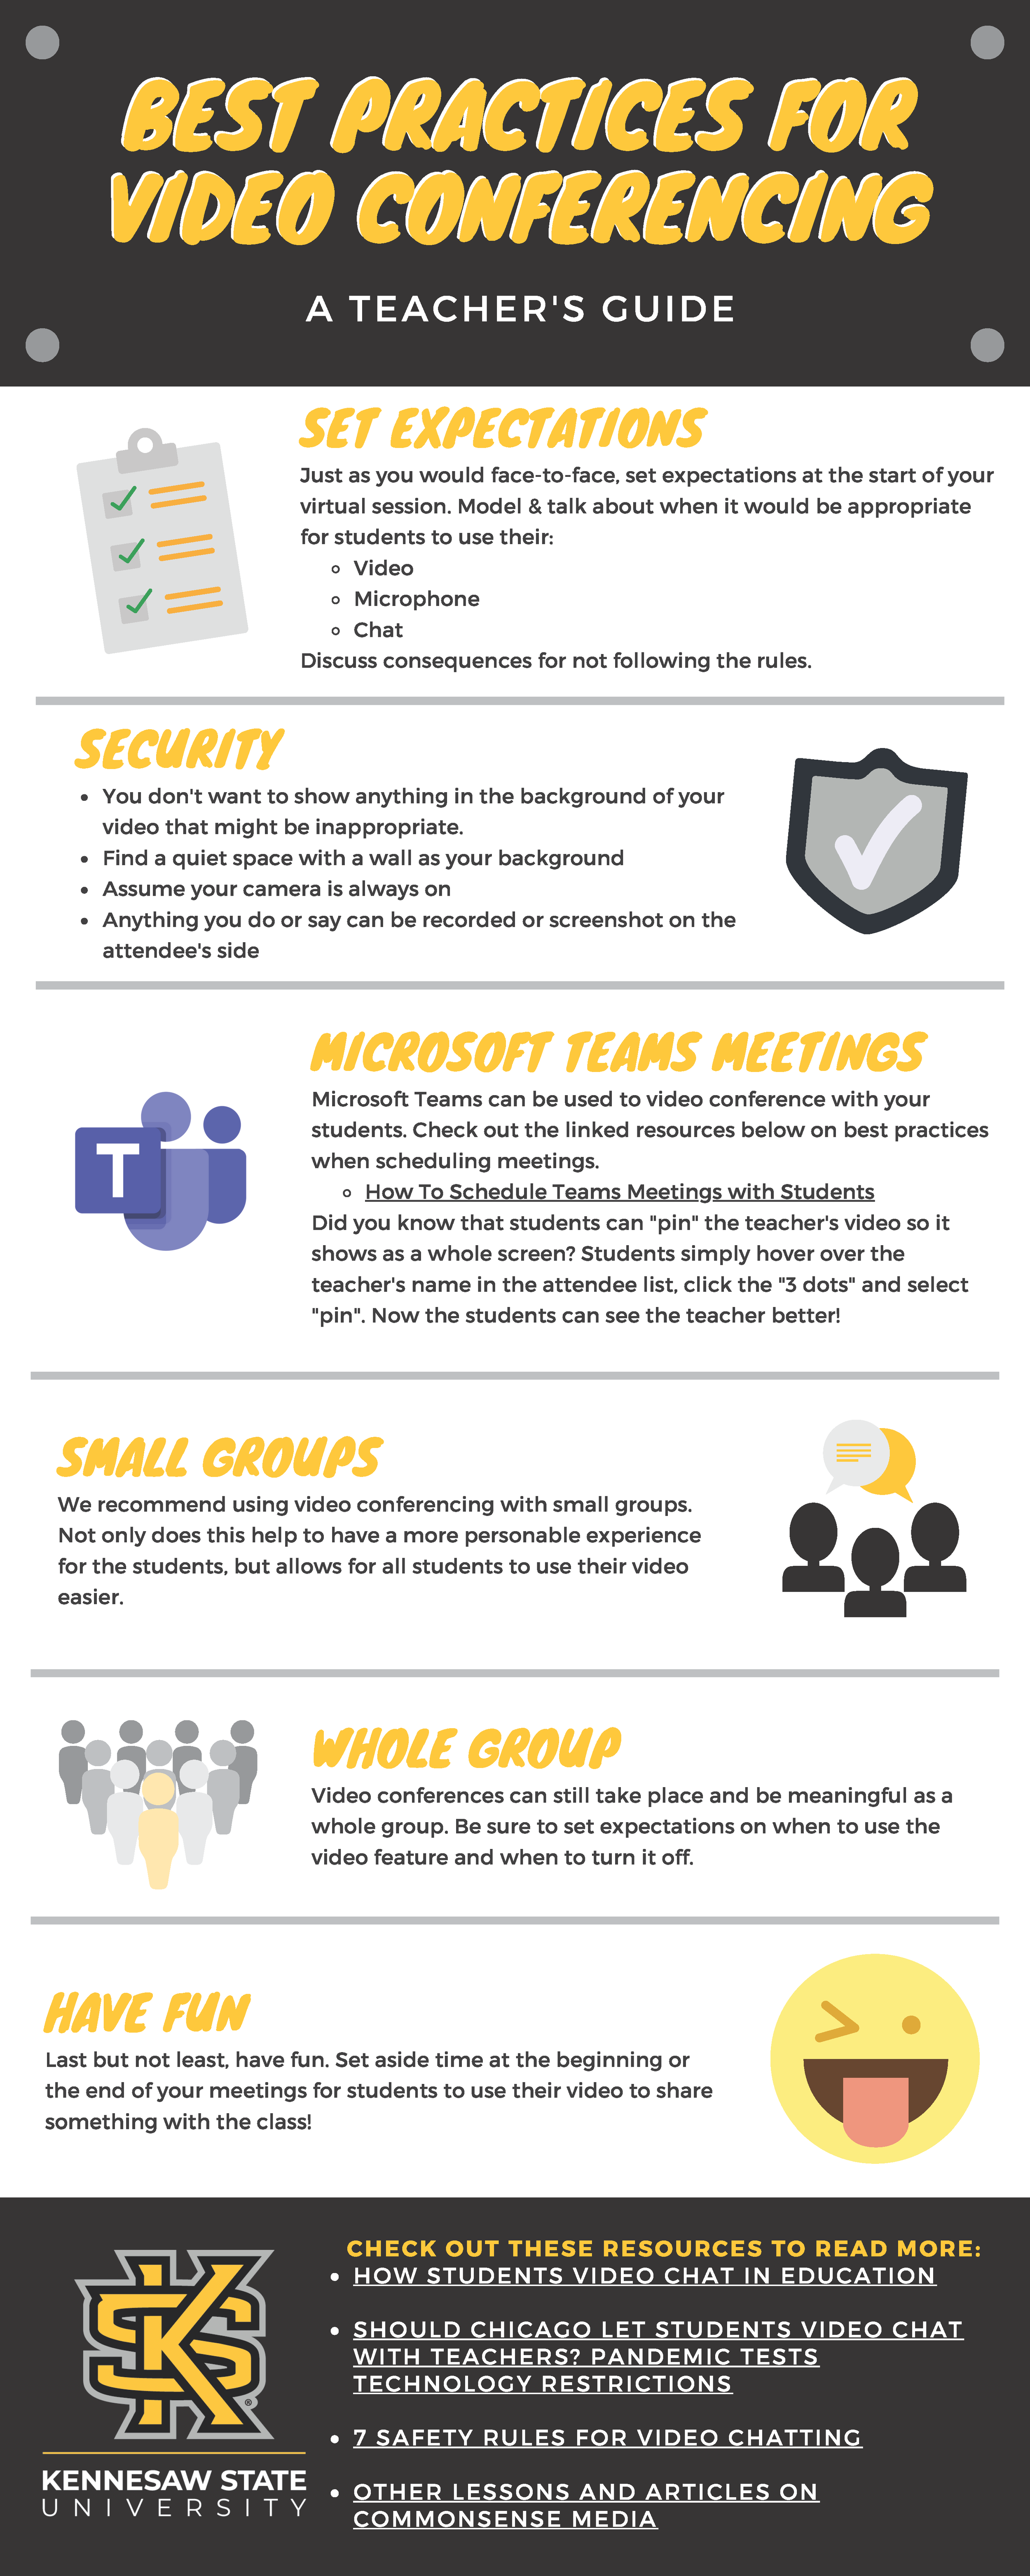 Best Practices for Video Conferences - A Teachers Guide.png